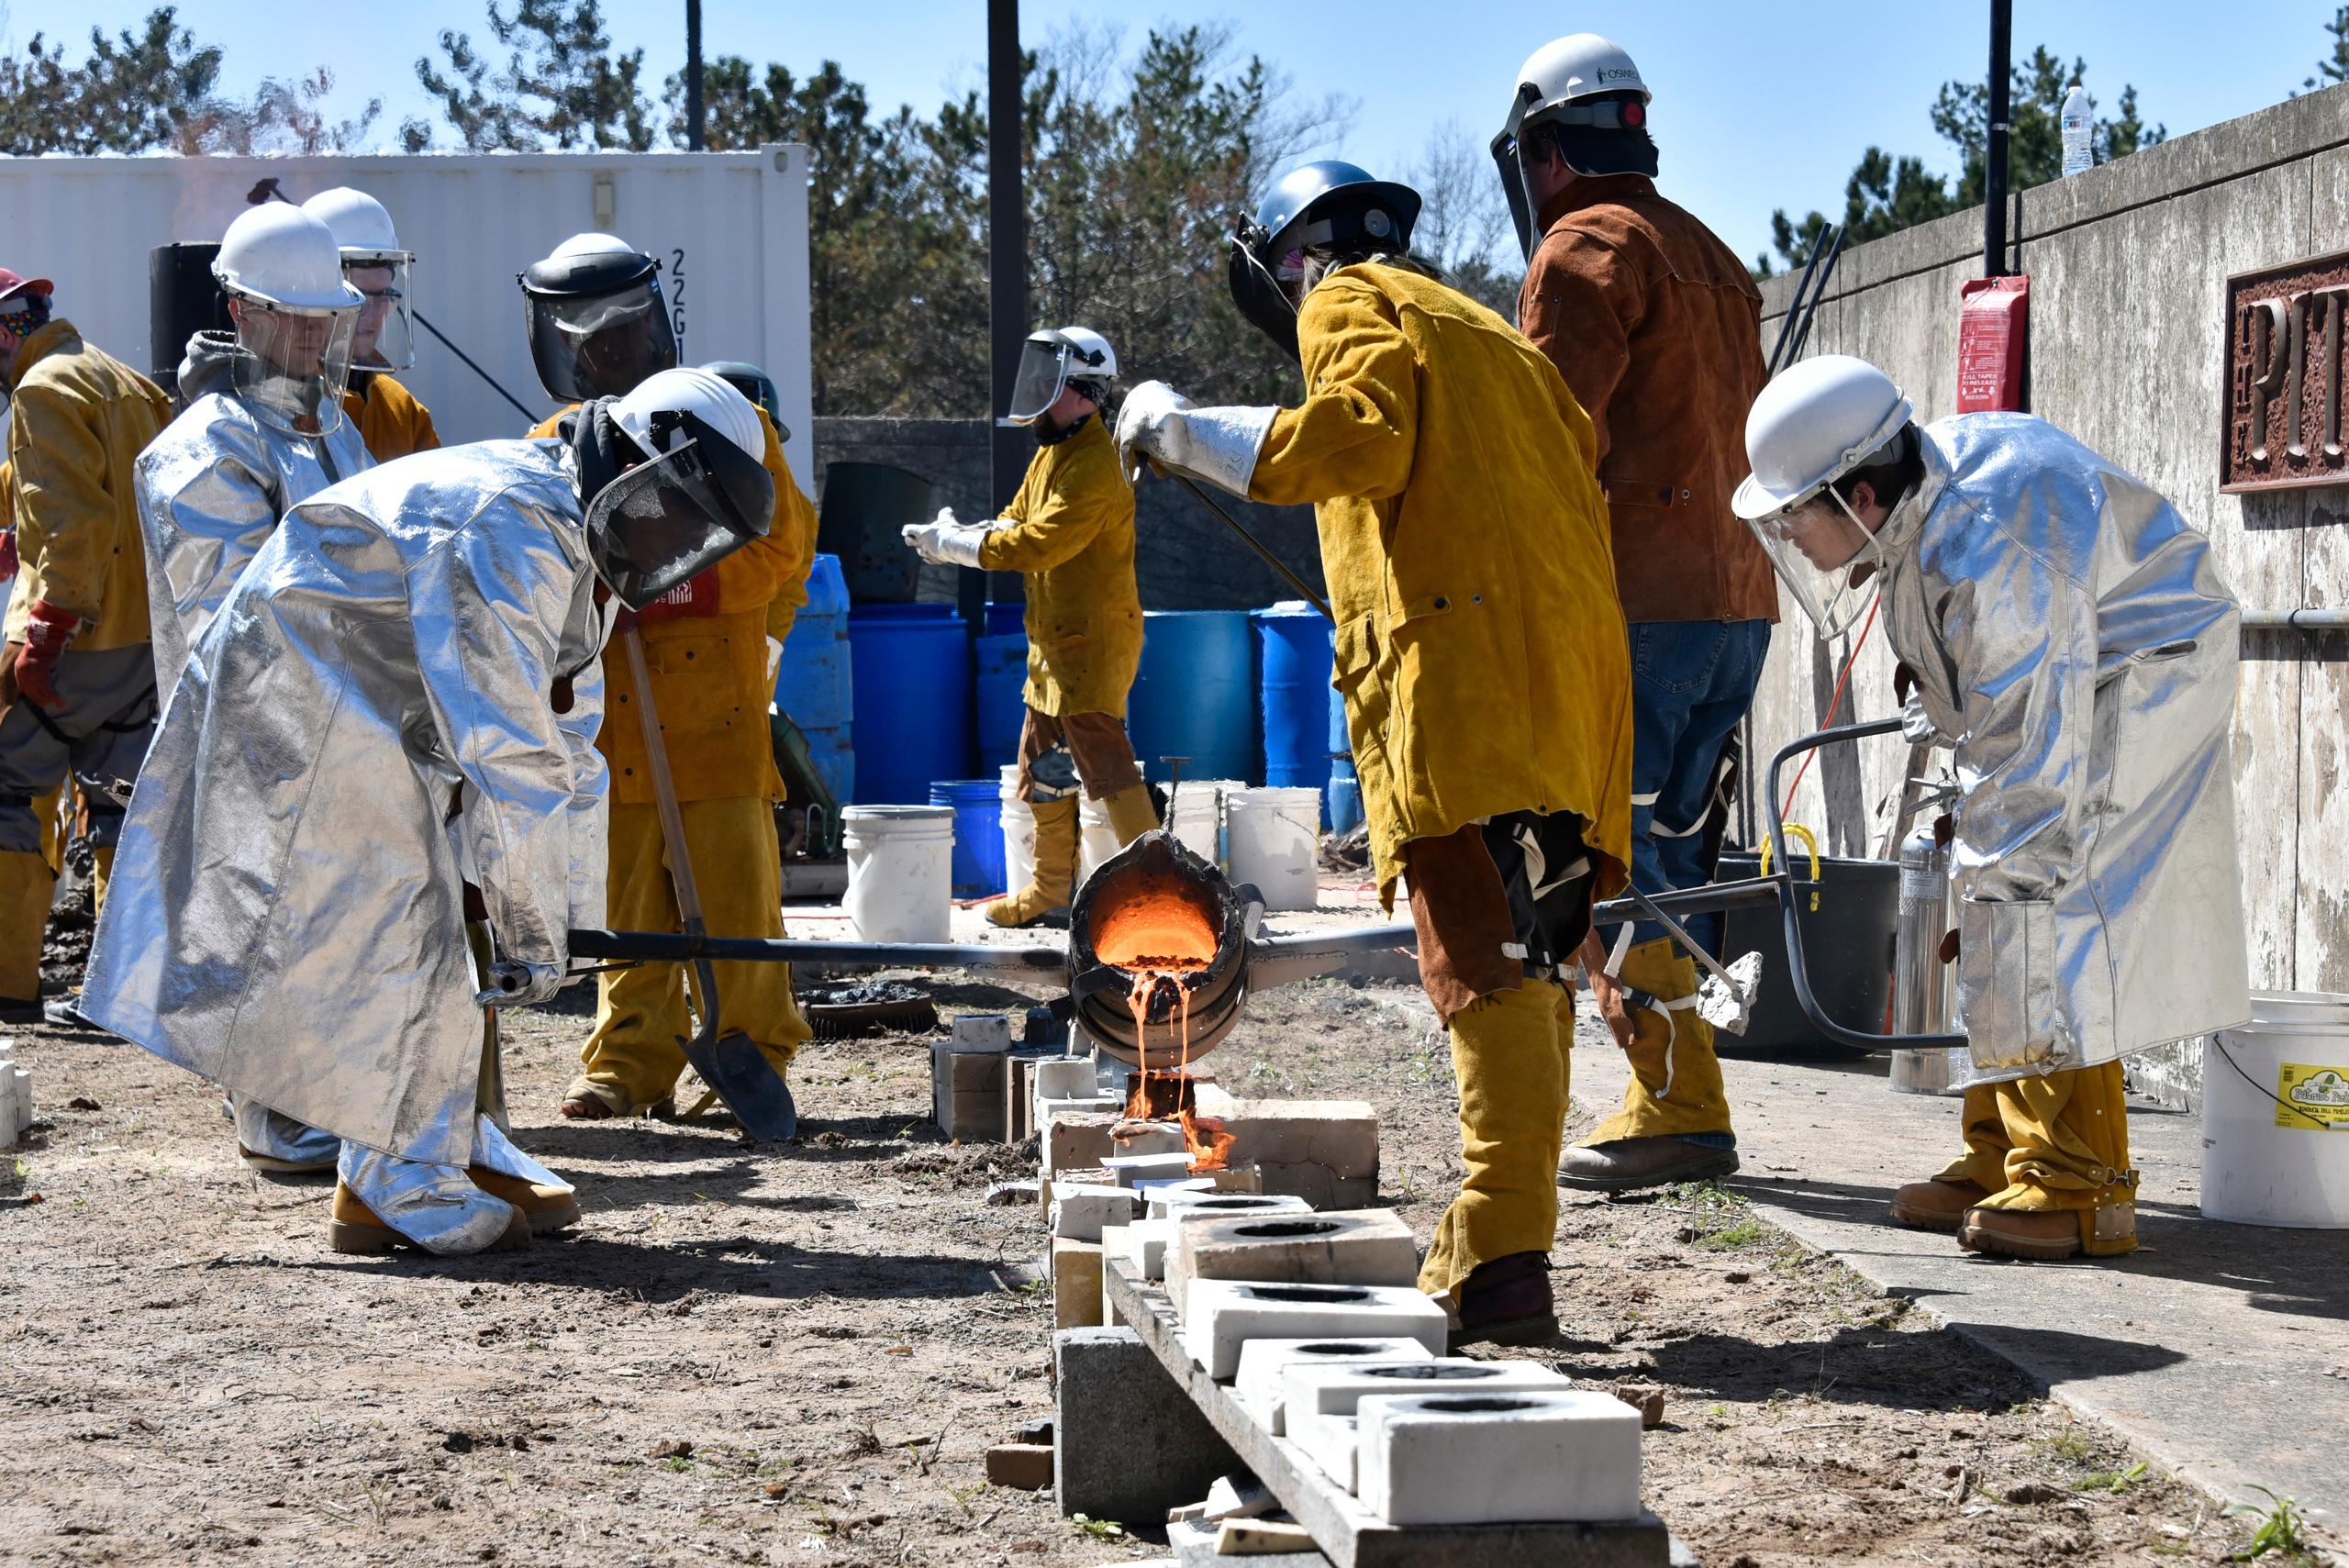 Students work with molten iron in the annual Iron Pour event